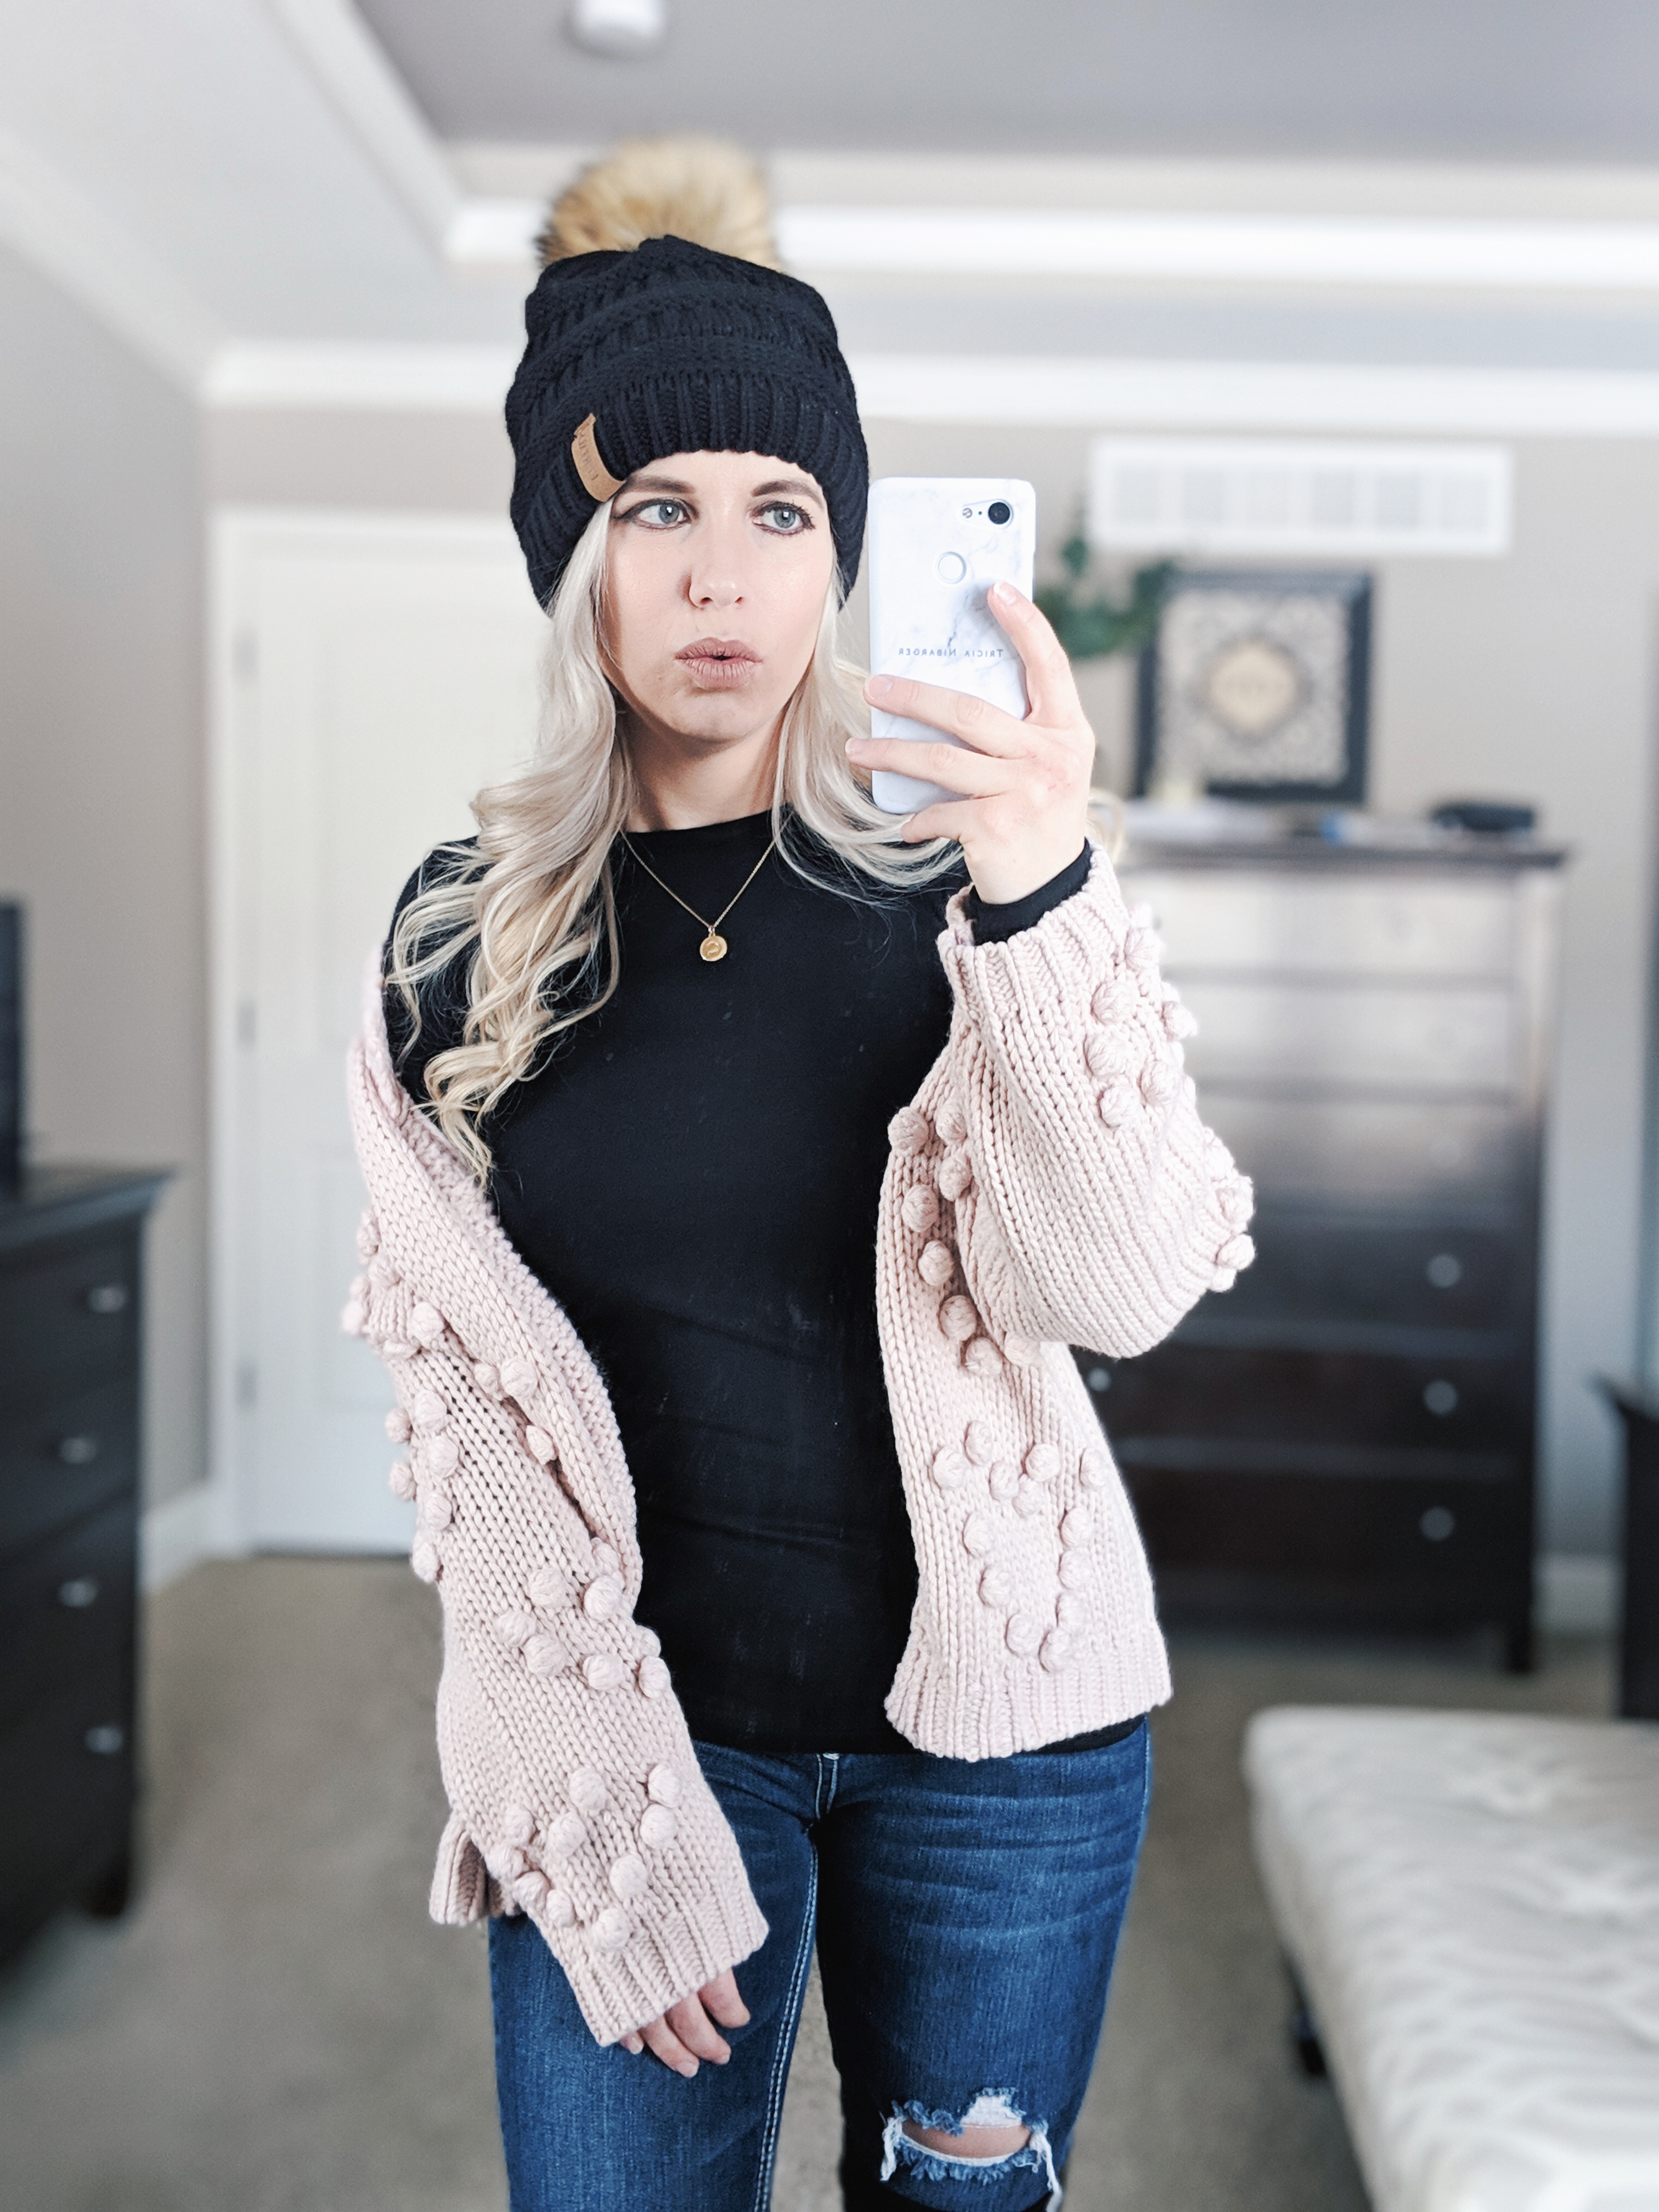 Cute Valentine's Day Outfit Ideas for Women: 5 affordable outfits from Amazon that will be perfect for Valentine's Day 2019! This fashion blogger try-on haul includes sexy Valentine's Day outfits, heart sweaters, heart pom cardigans, and more. Get the cutest affordable fashion for Valentine's Day with these inspiring looks!